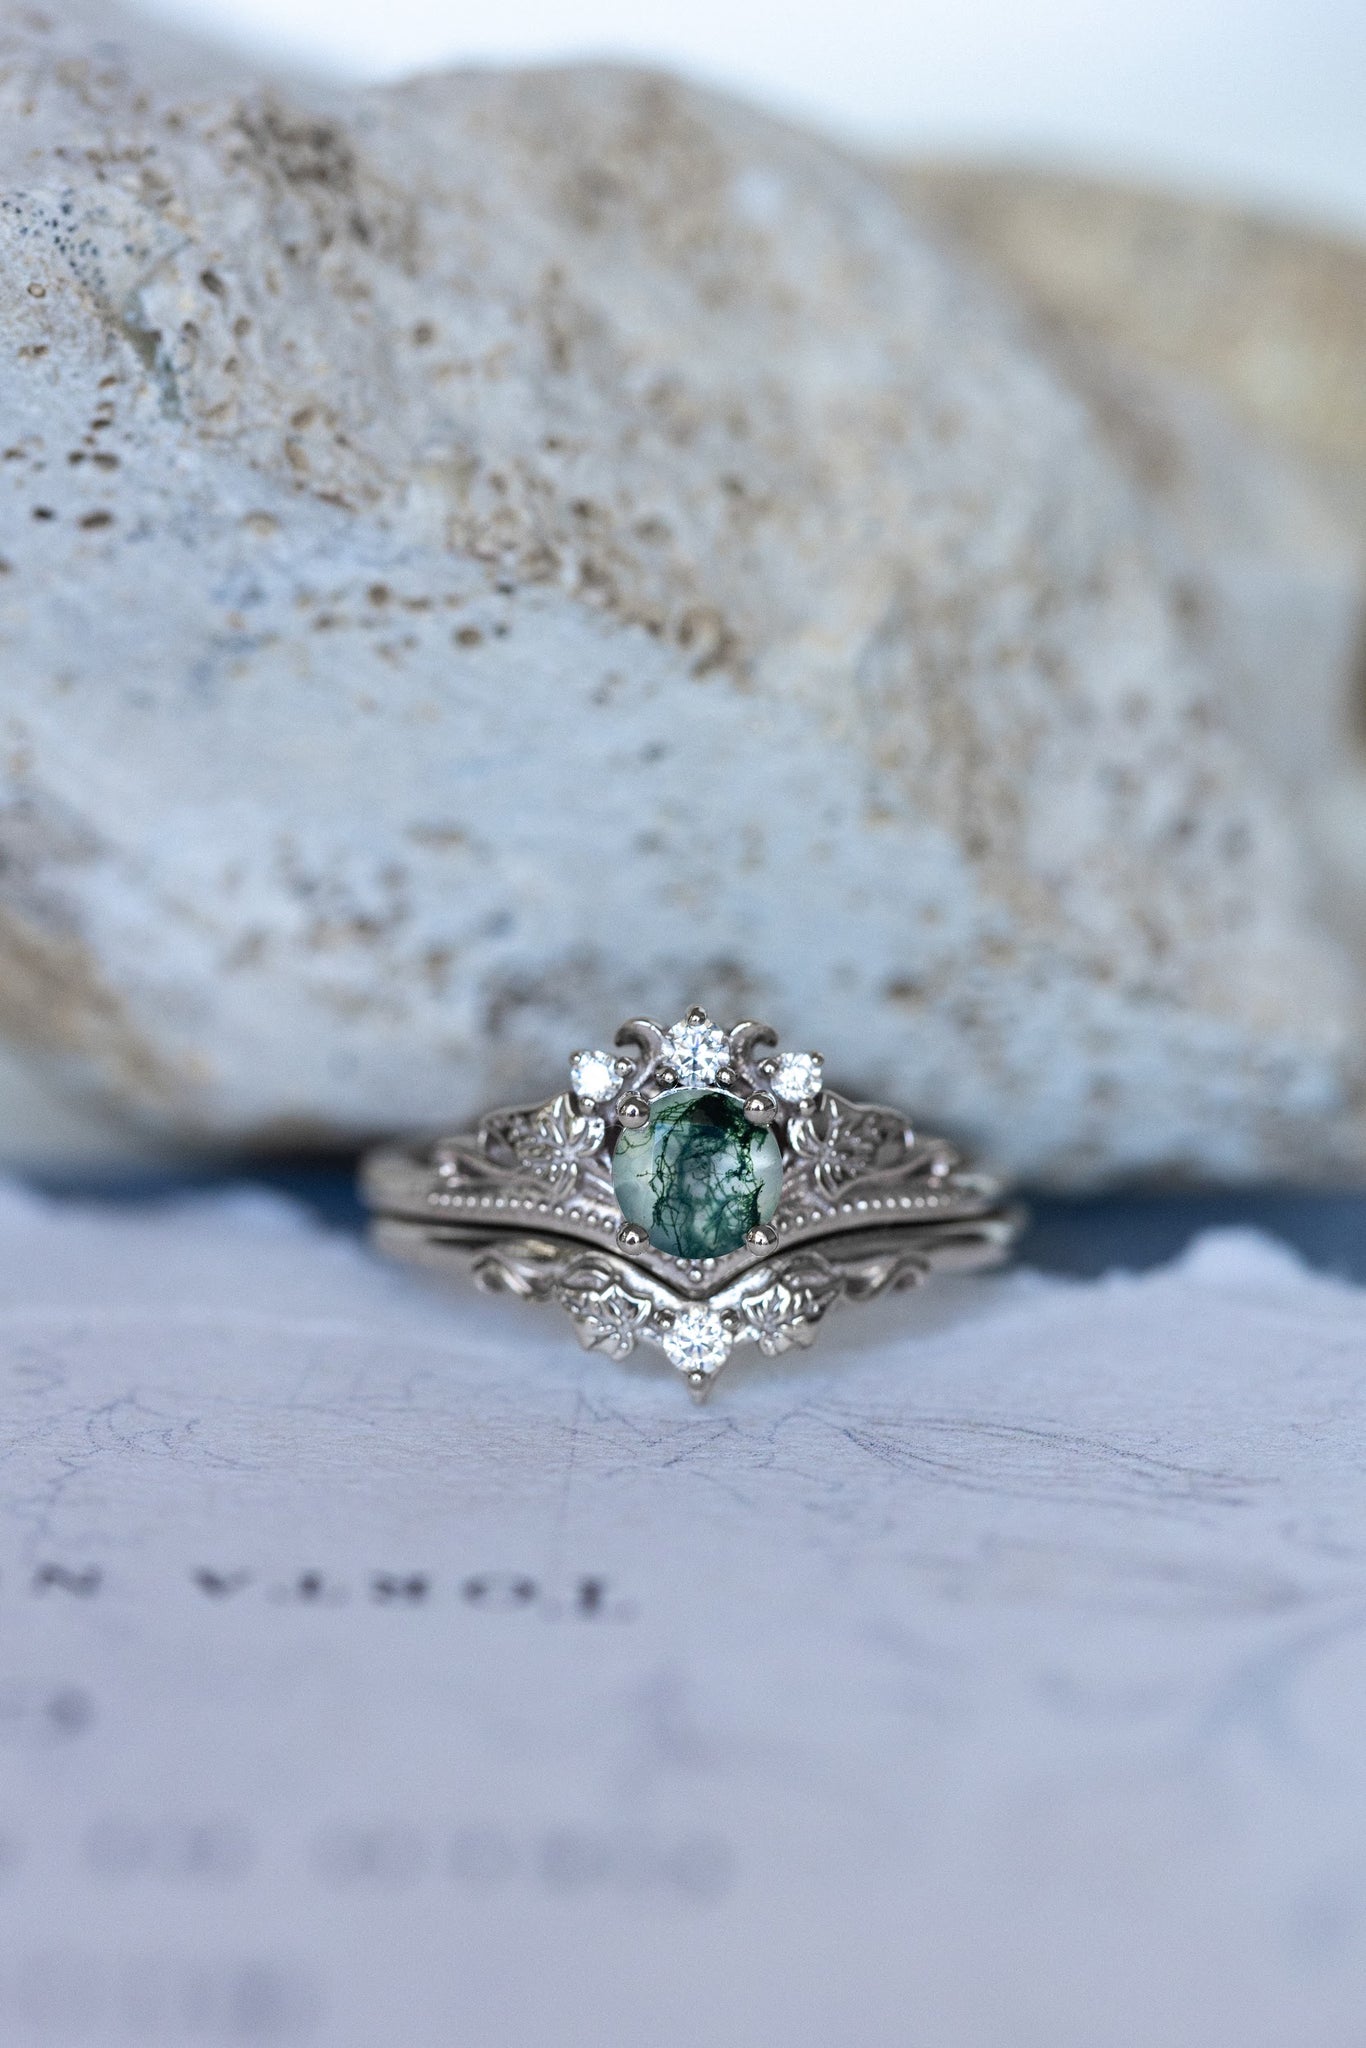 READY TO SHIP: Ariadne bridal ring set in 14K or 18K white gold, natural moss agate 5 mm, accents moissanites, AVAILABLE RING SIZES: 6-11US - Eden Garden Jewelry™